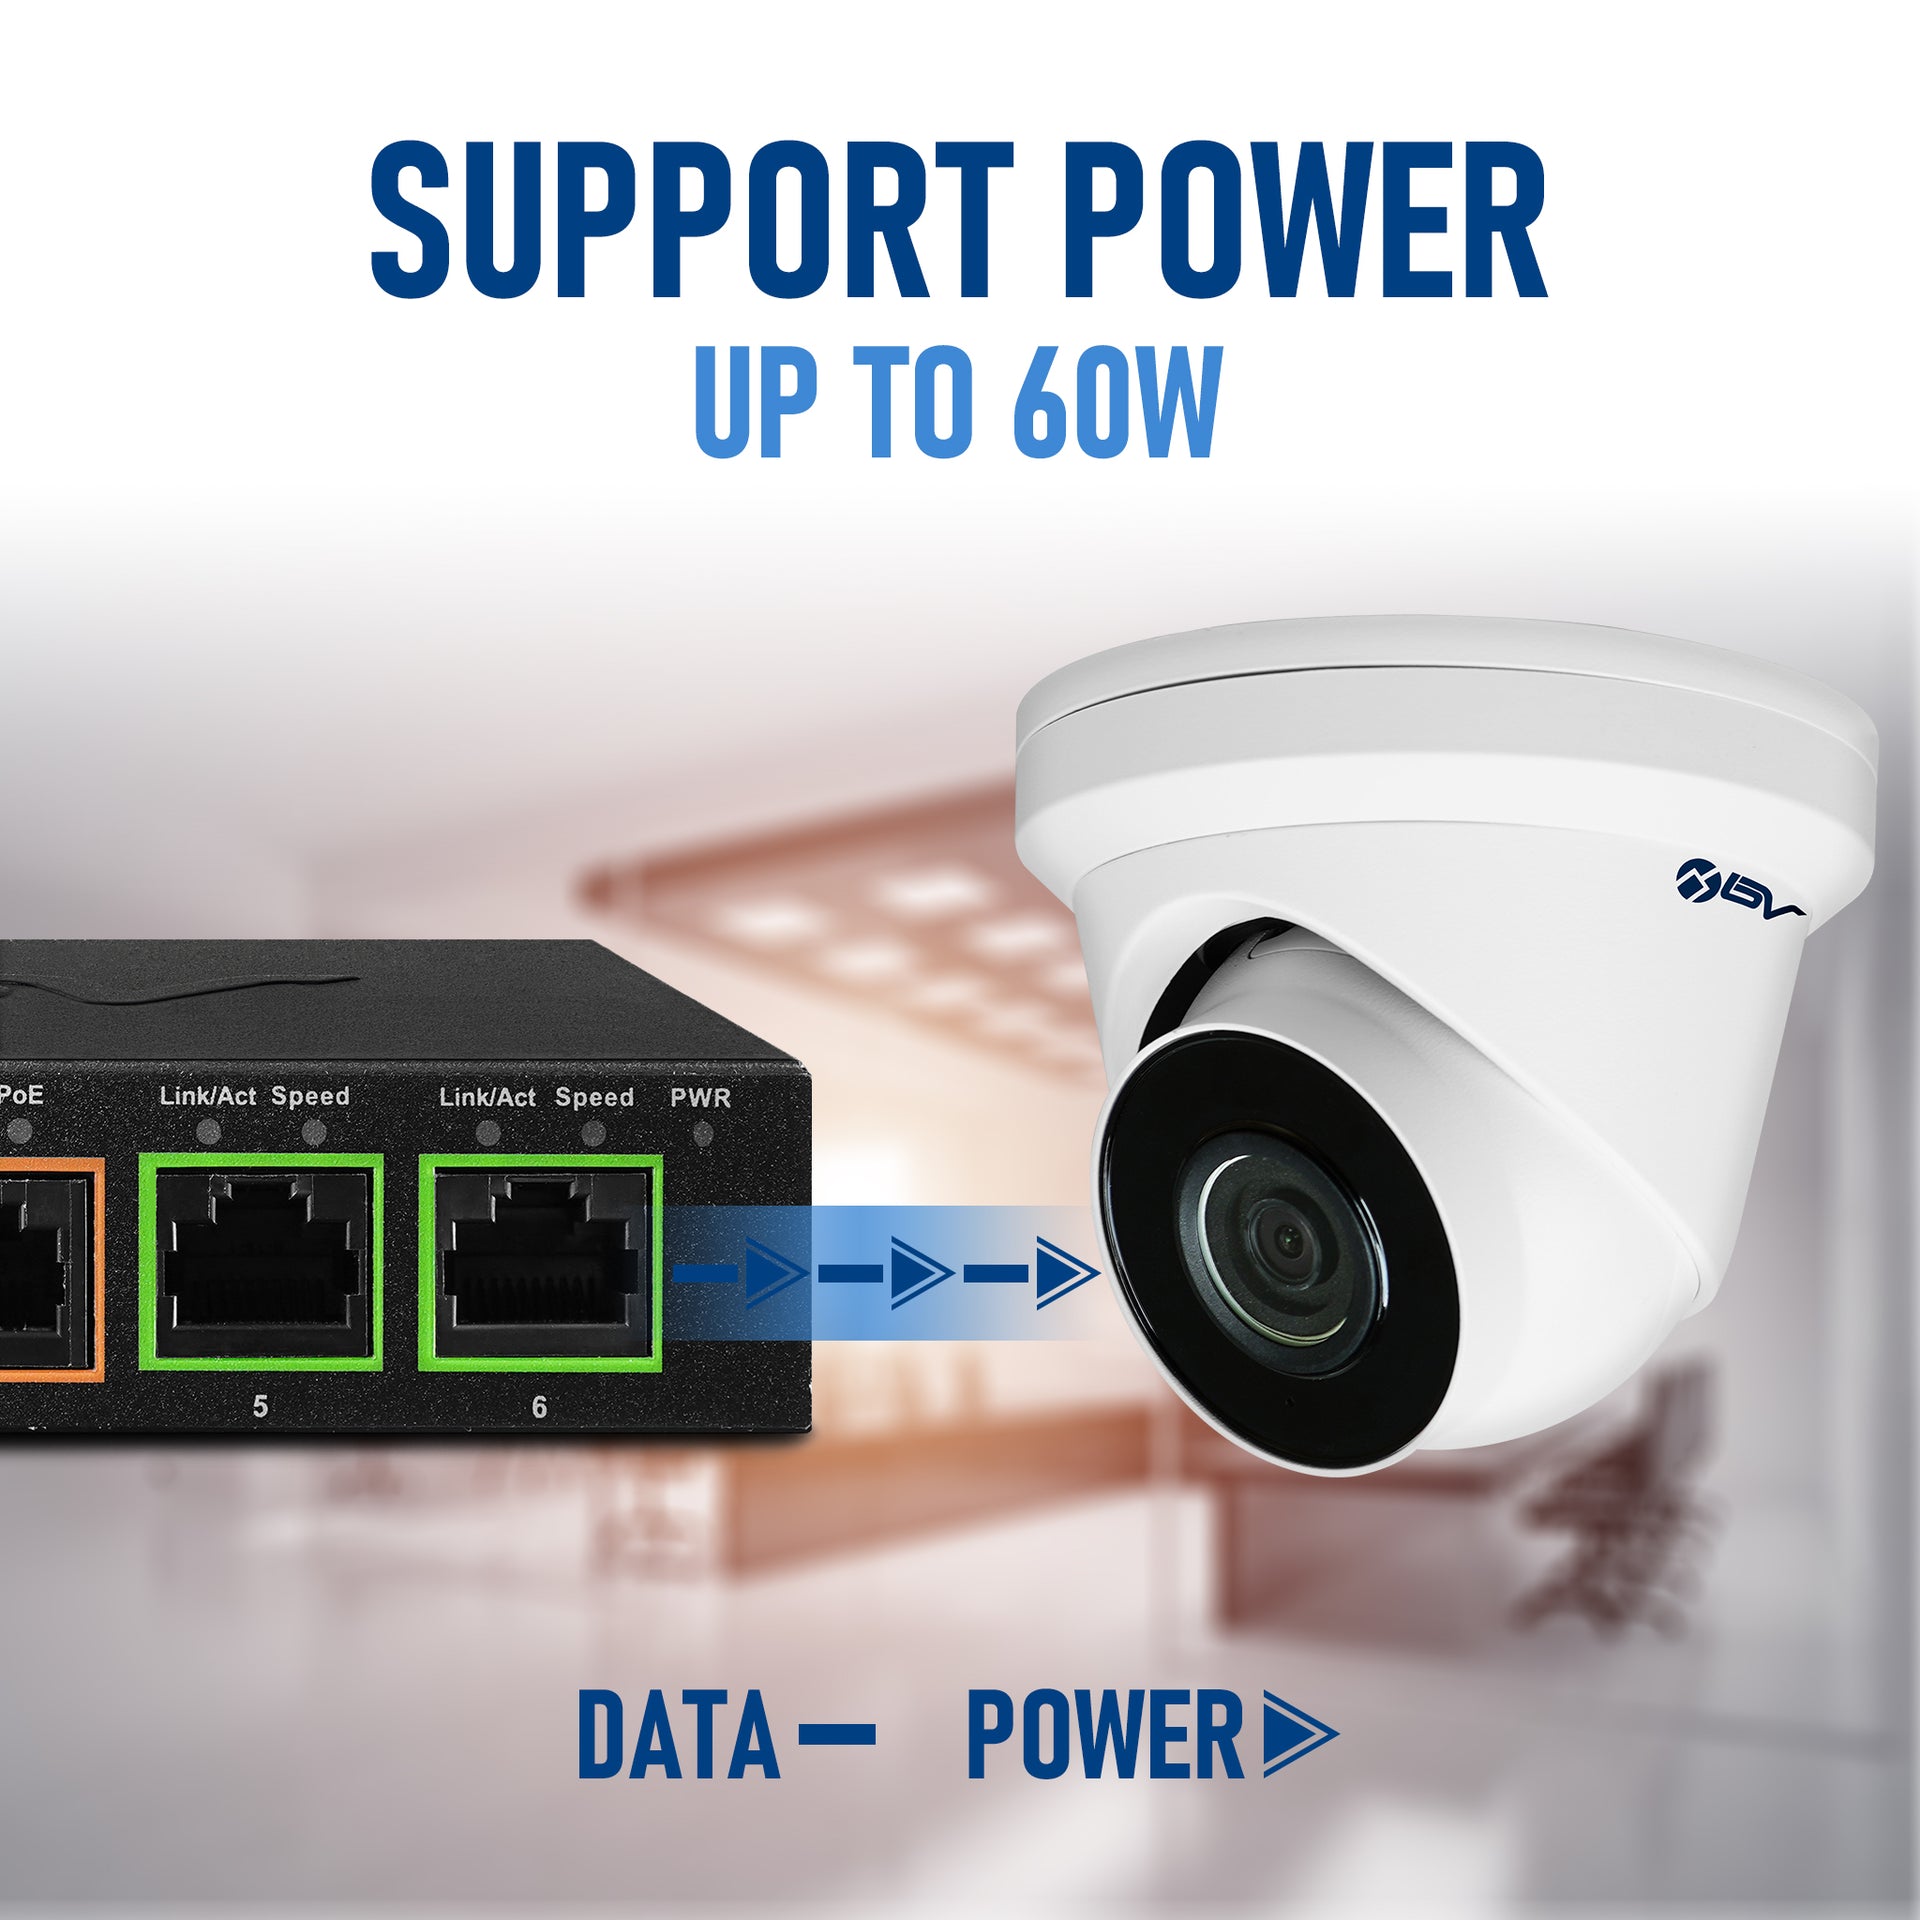 Data and Power Support